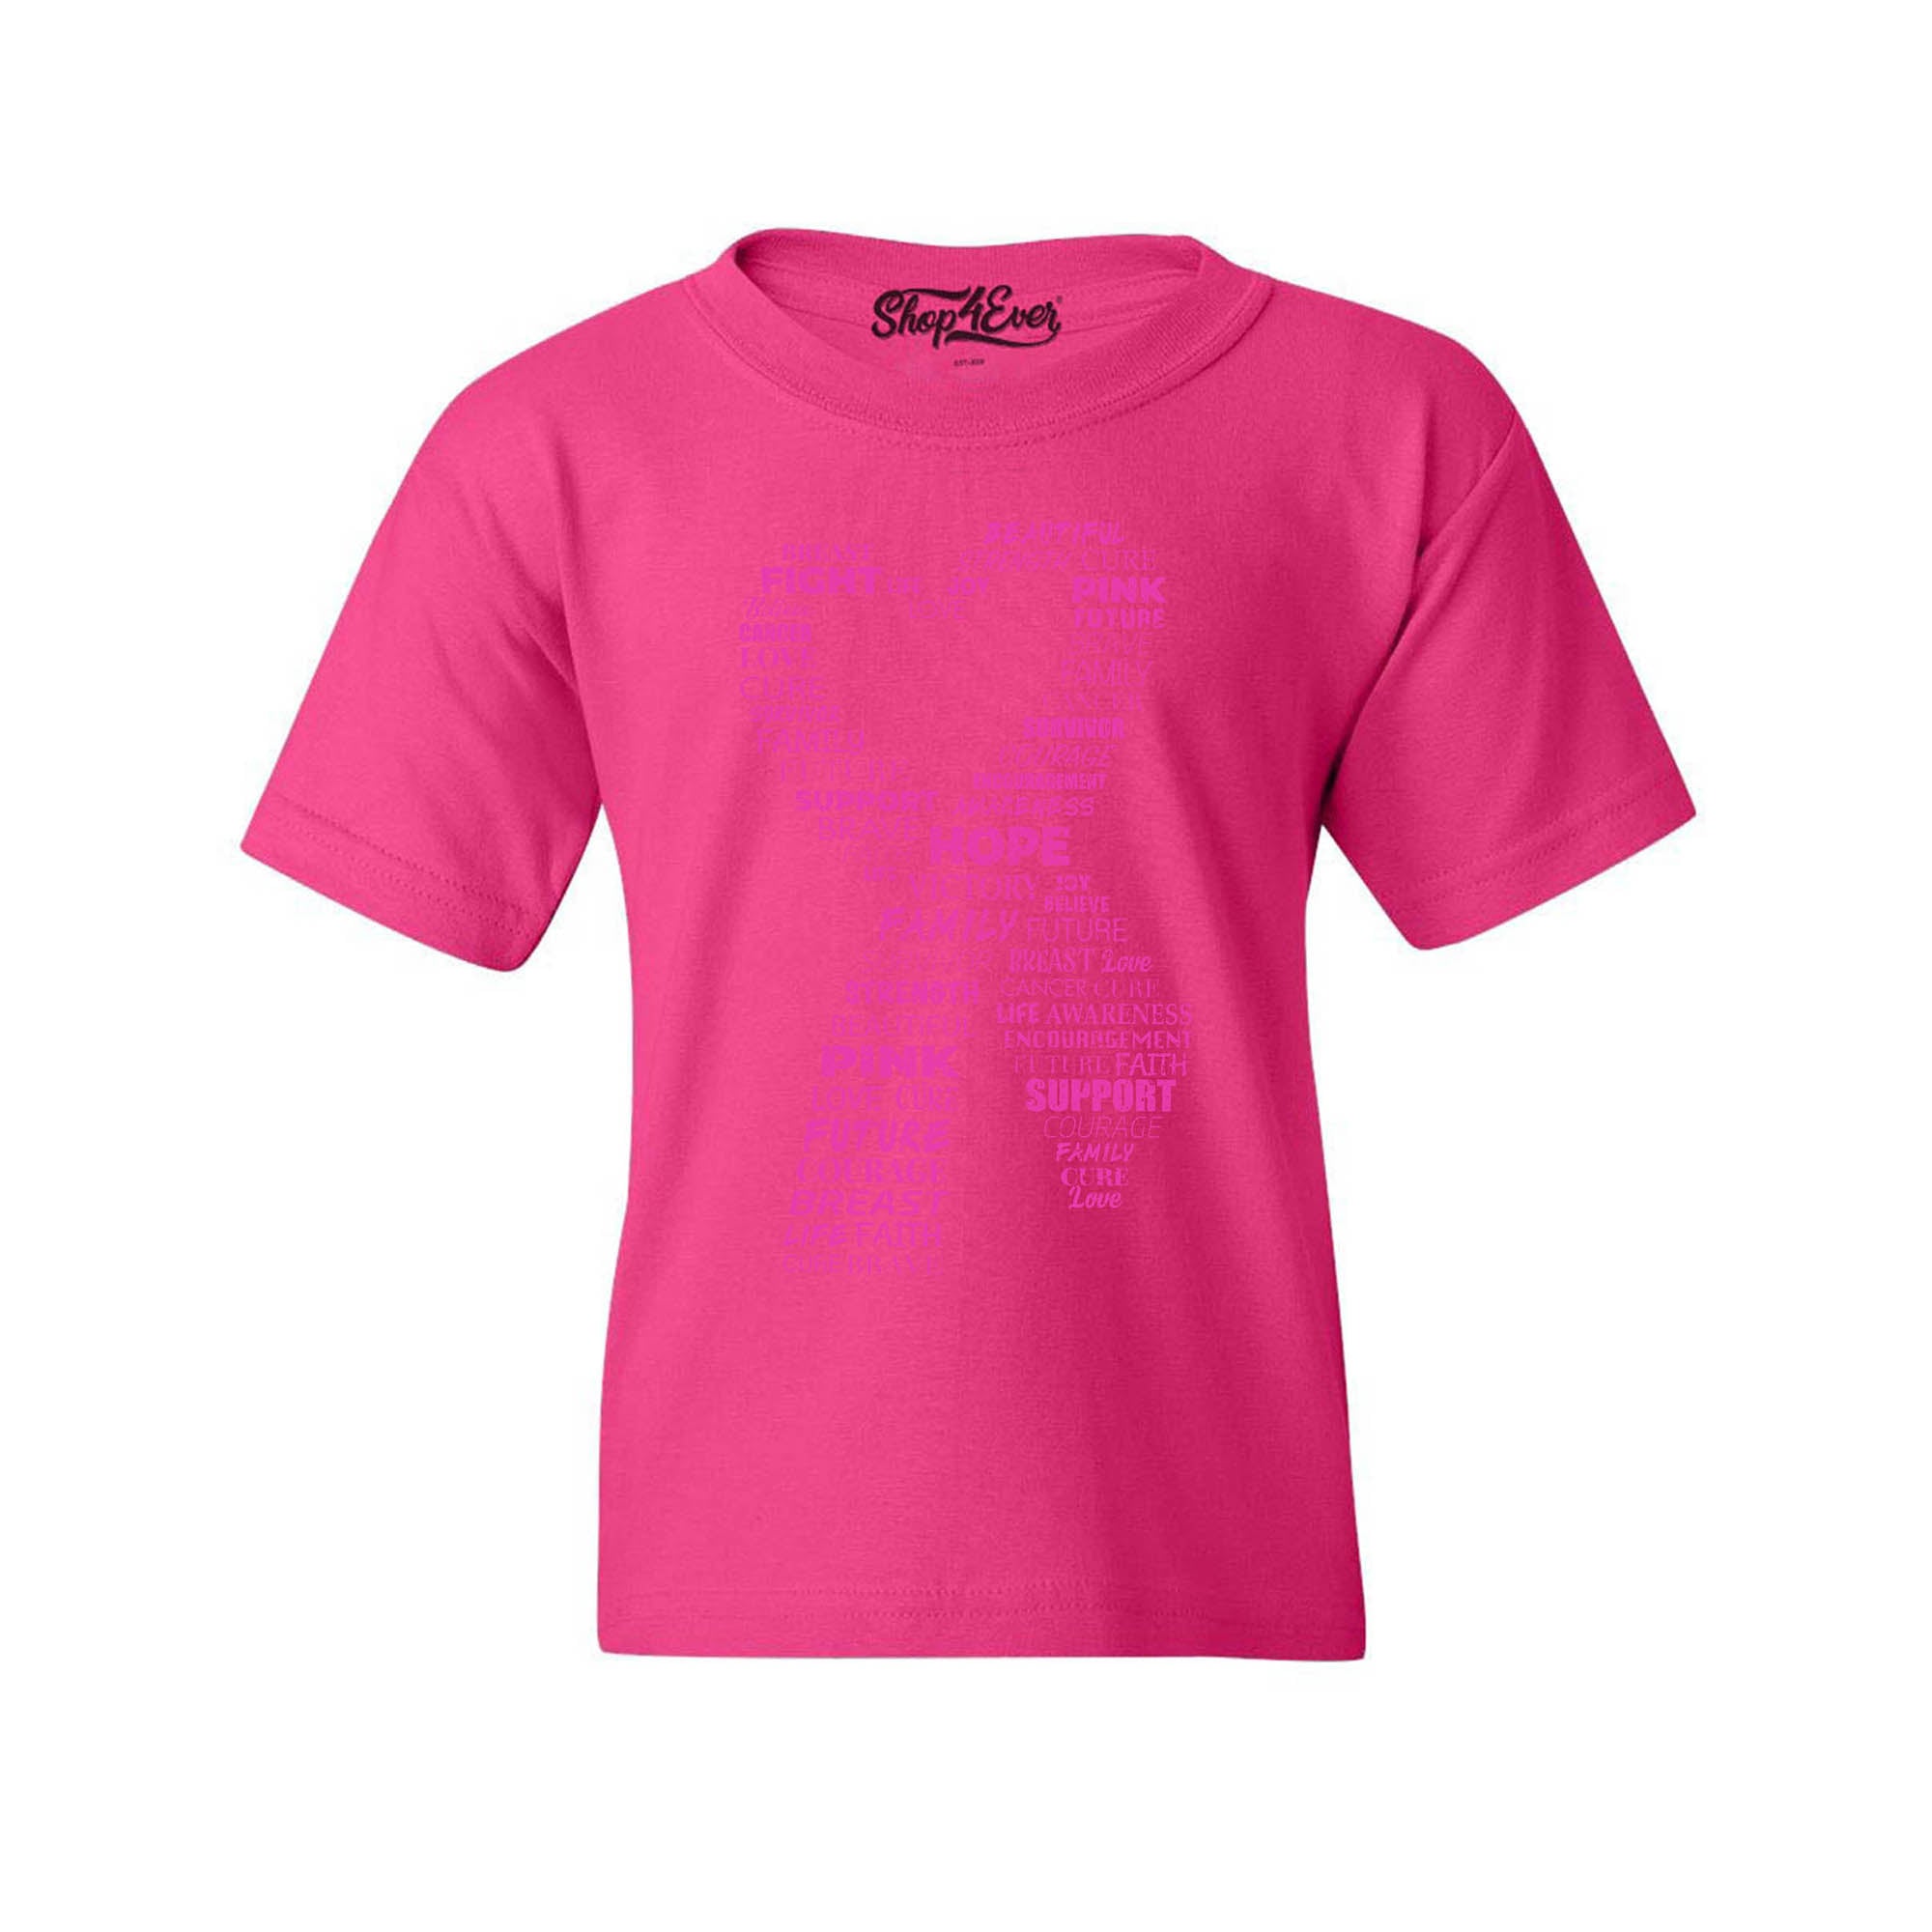 Pink Heart Ribbon Montage Breast Cancer Word Cloud Youth's T-Shirt